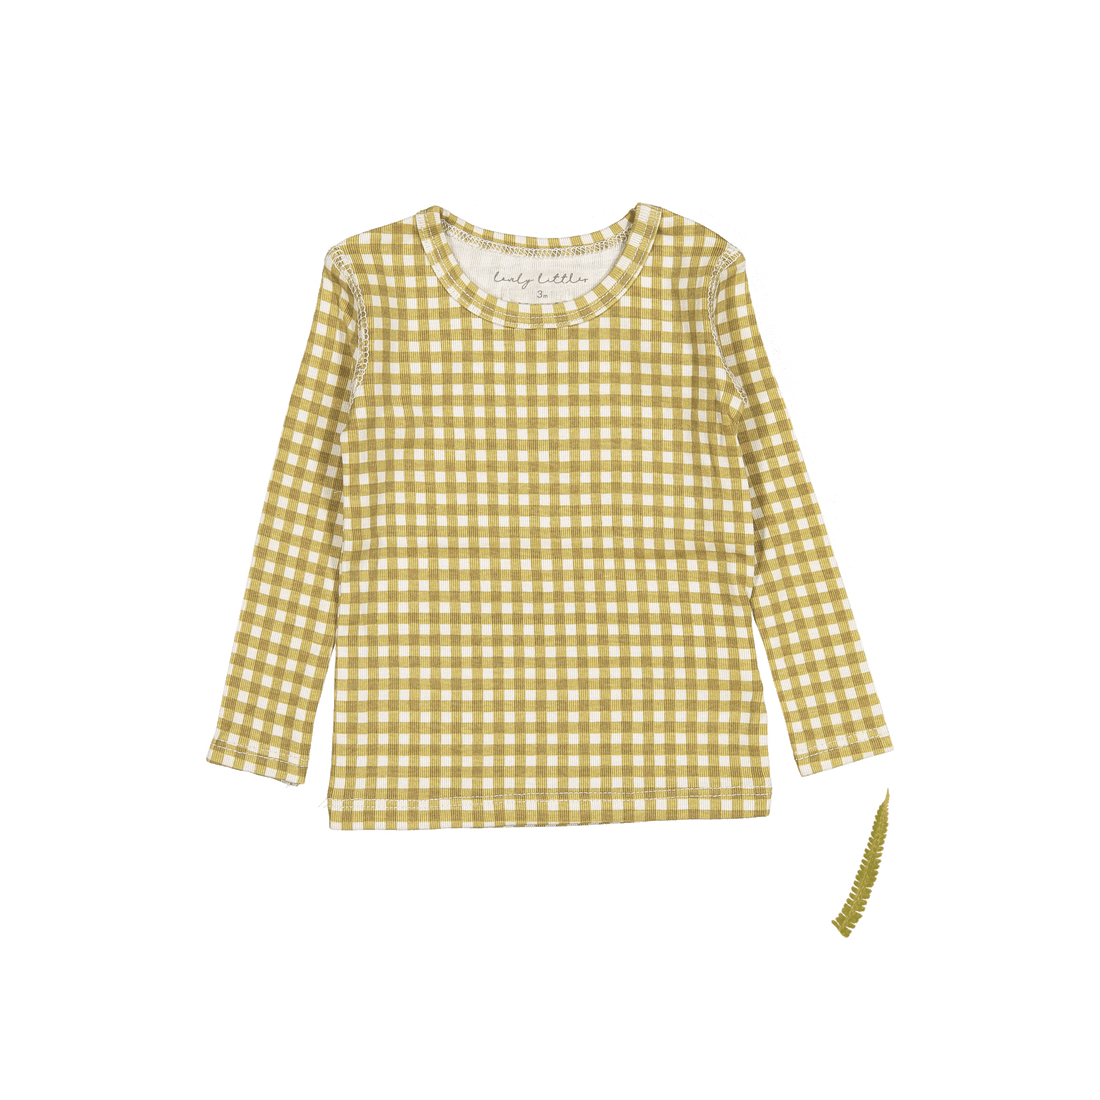 The Printed Long Sleeve Tee - Golden Gingham